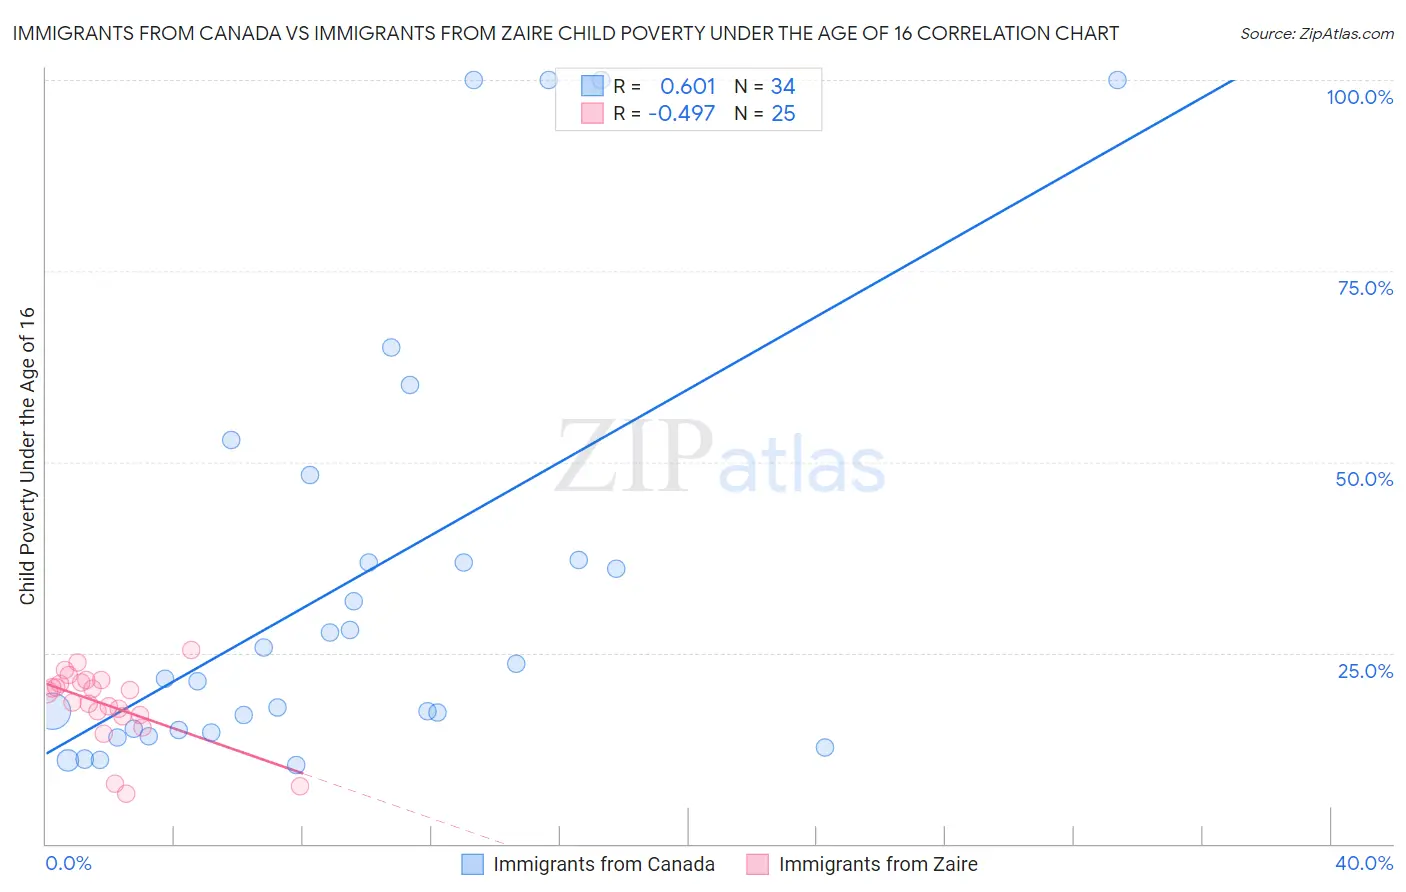 Immigrants from Canada vs Immigrants from Zaire Child Poverty Under the Age of 16